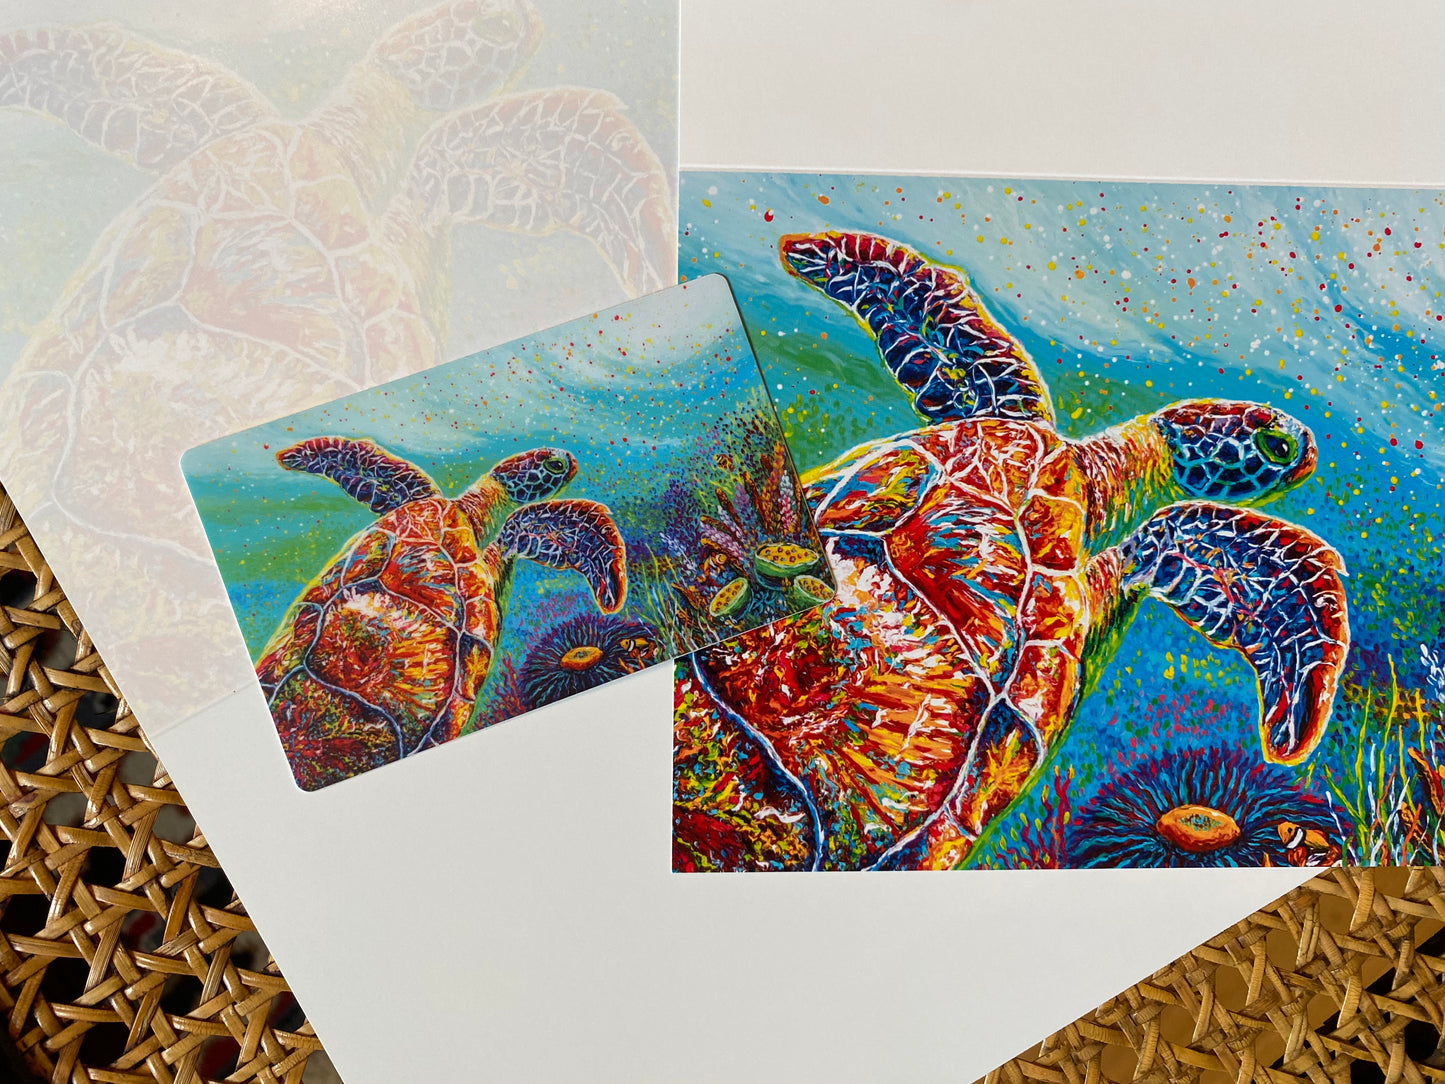 "Be Still" Green Sea Turtle Greeting Card for all occasion - Fine Art Greeting Card